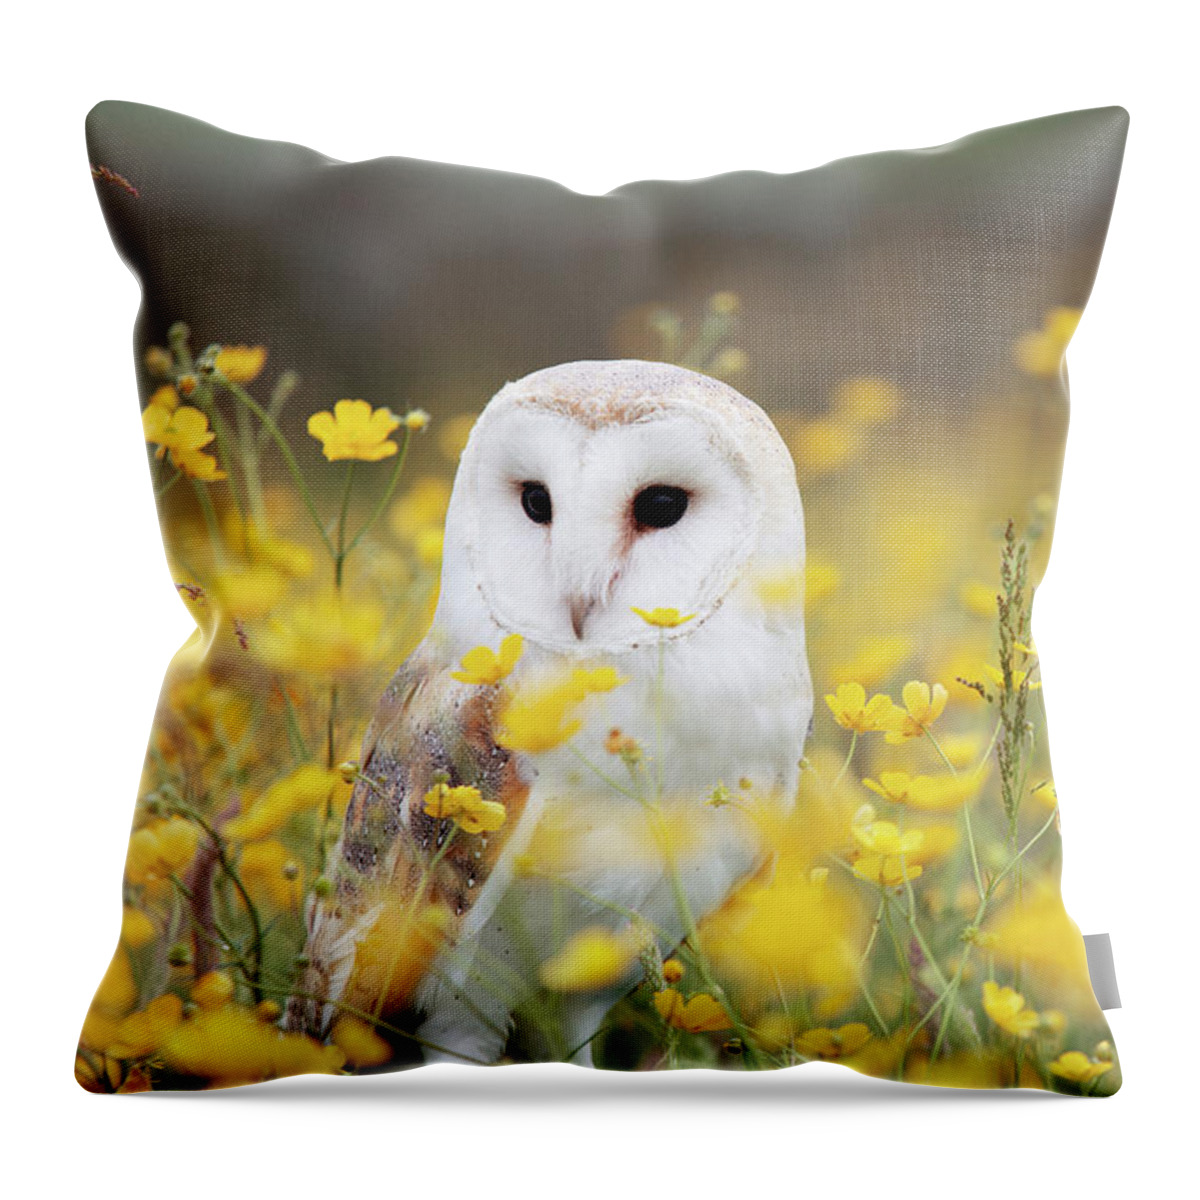 White Throw Pillow featuring the photograph White Owl by Happy Home Artistry